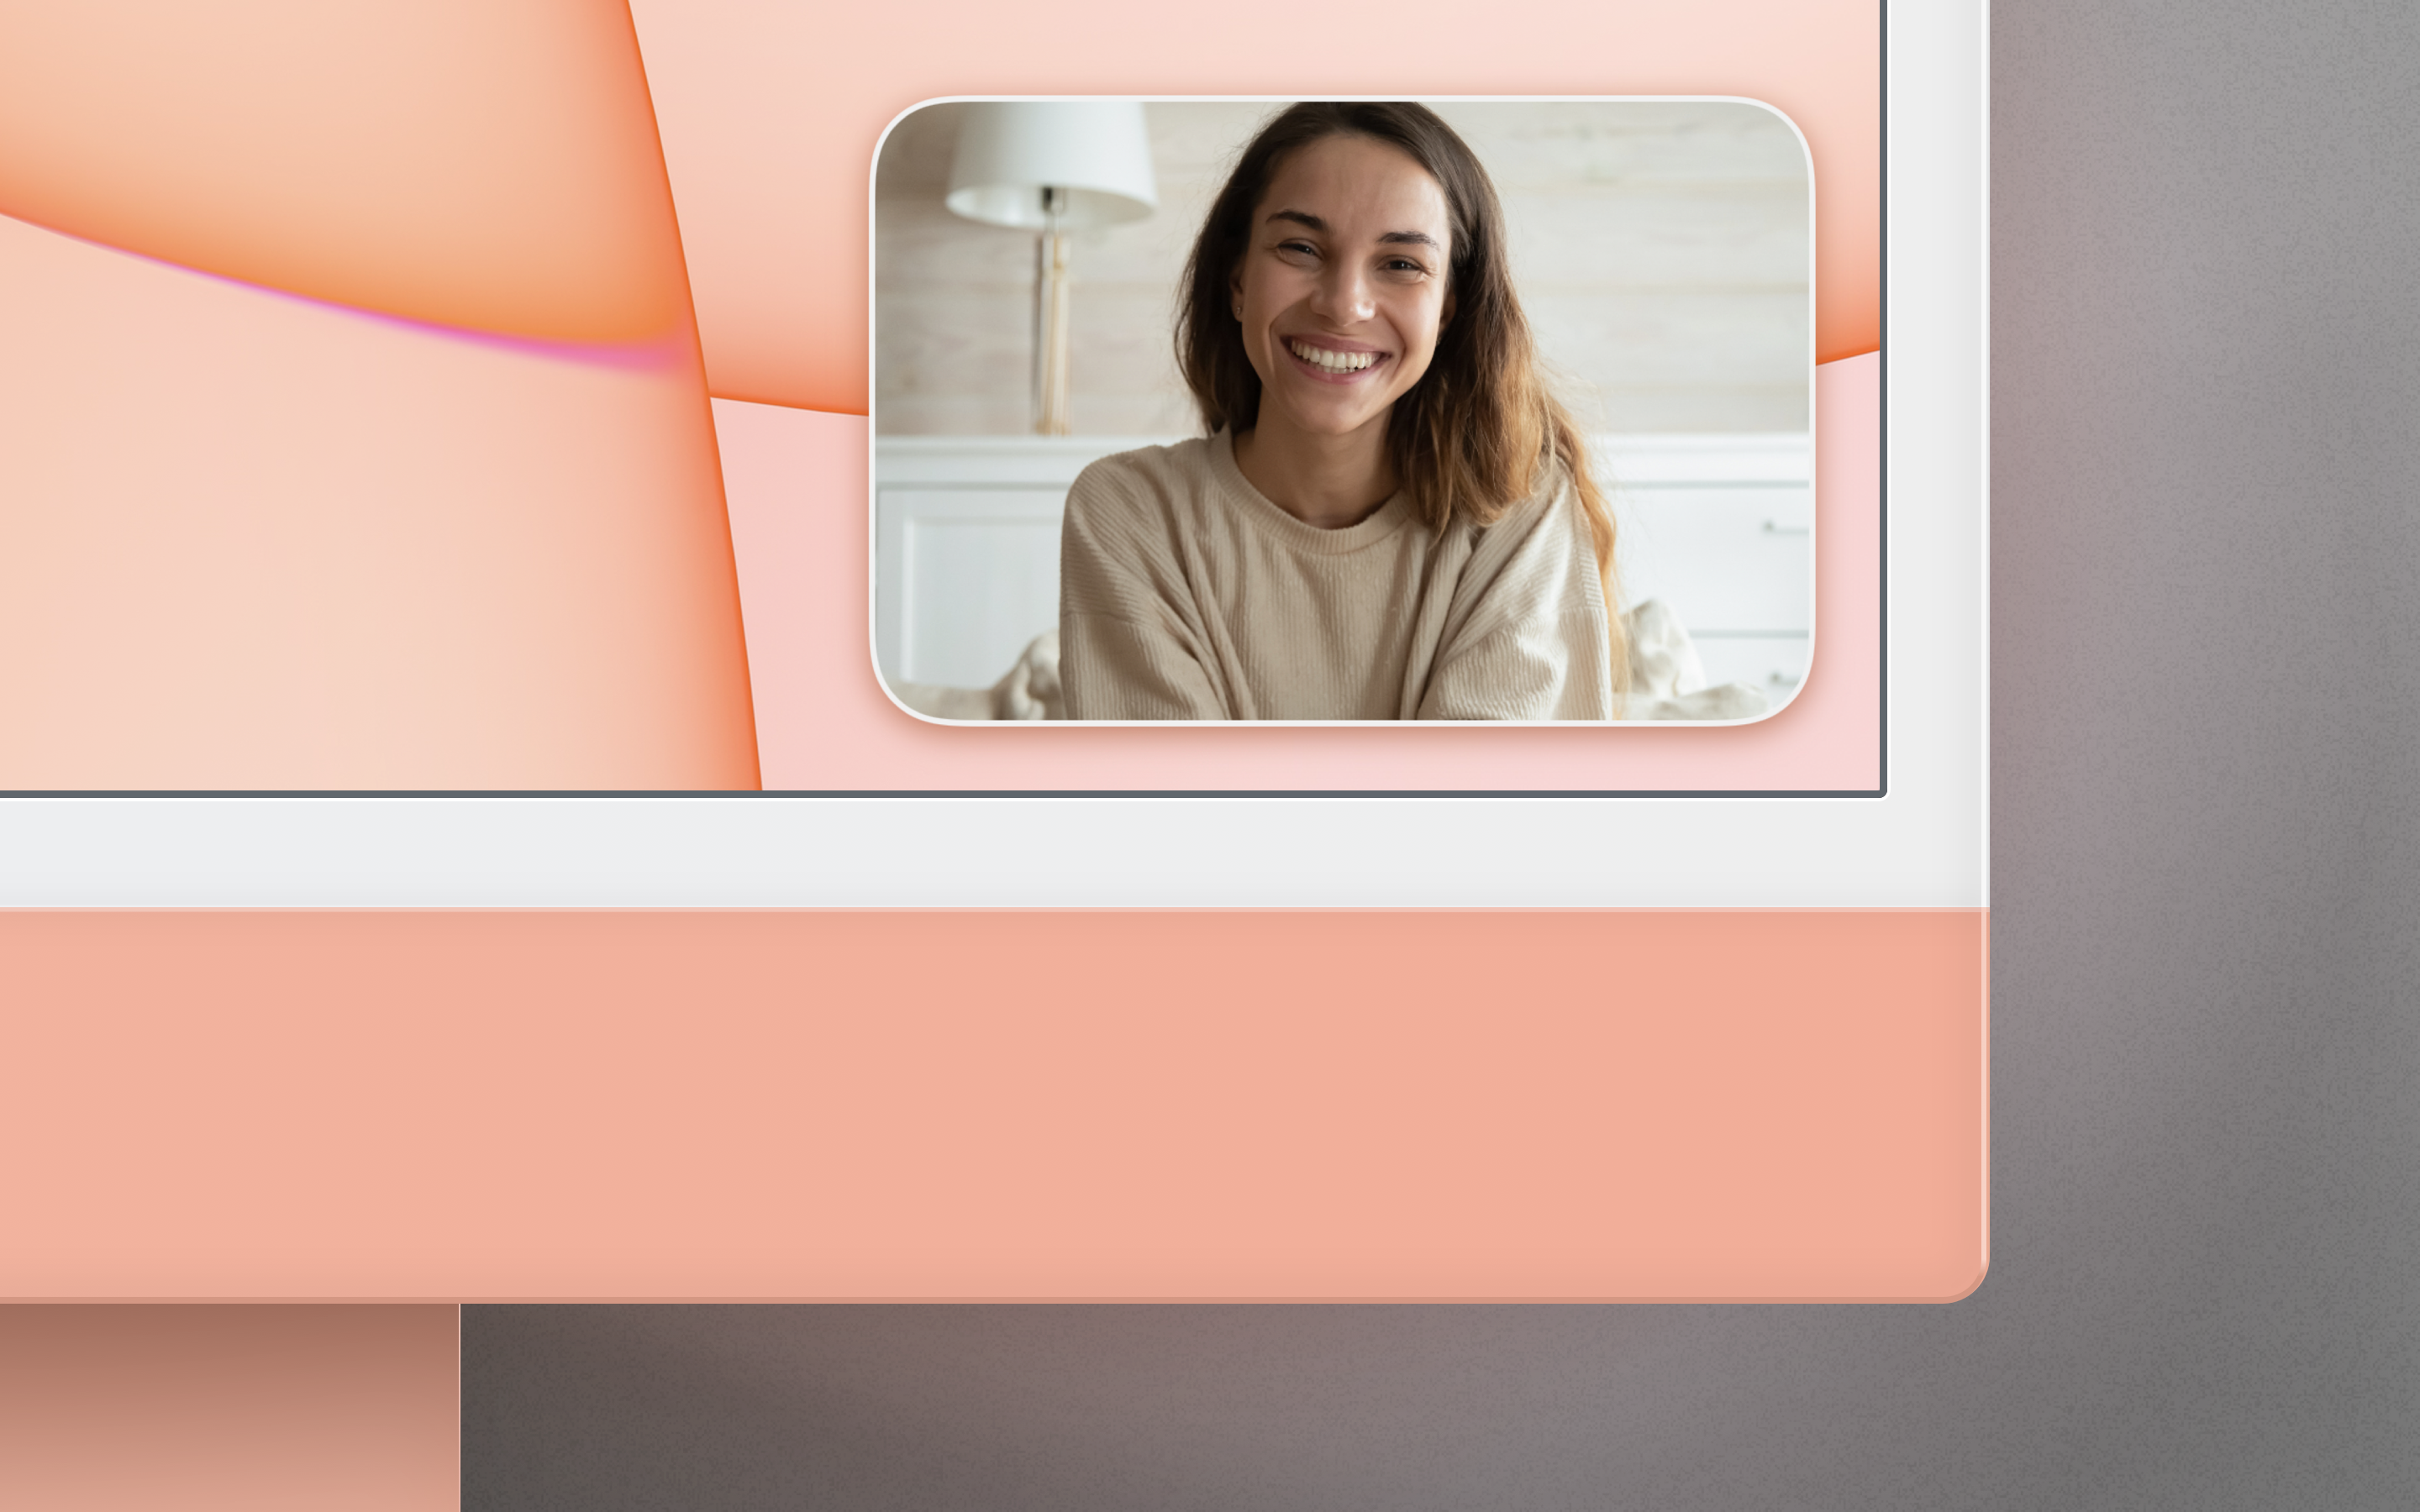 The bottom right corner of an orange iMac, with Mirror Magnet running, which displays a camera image of a young woman.